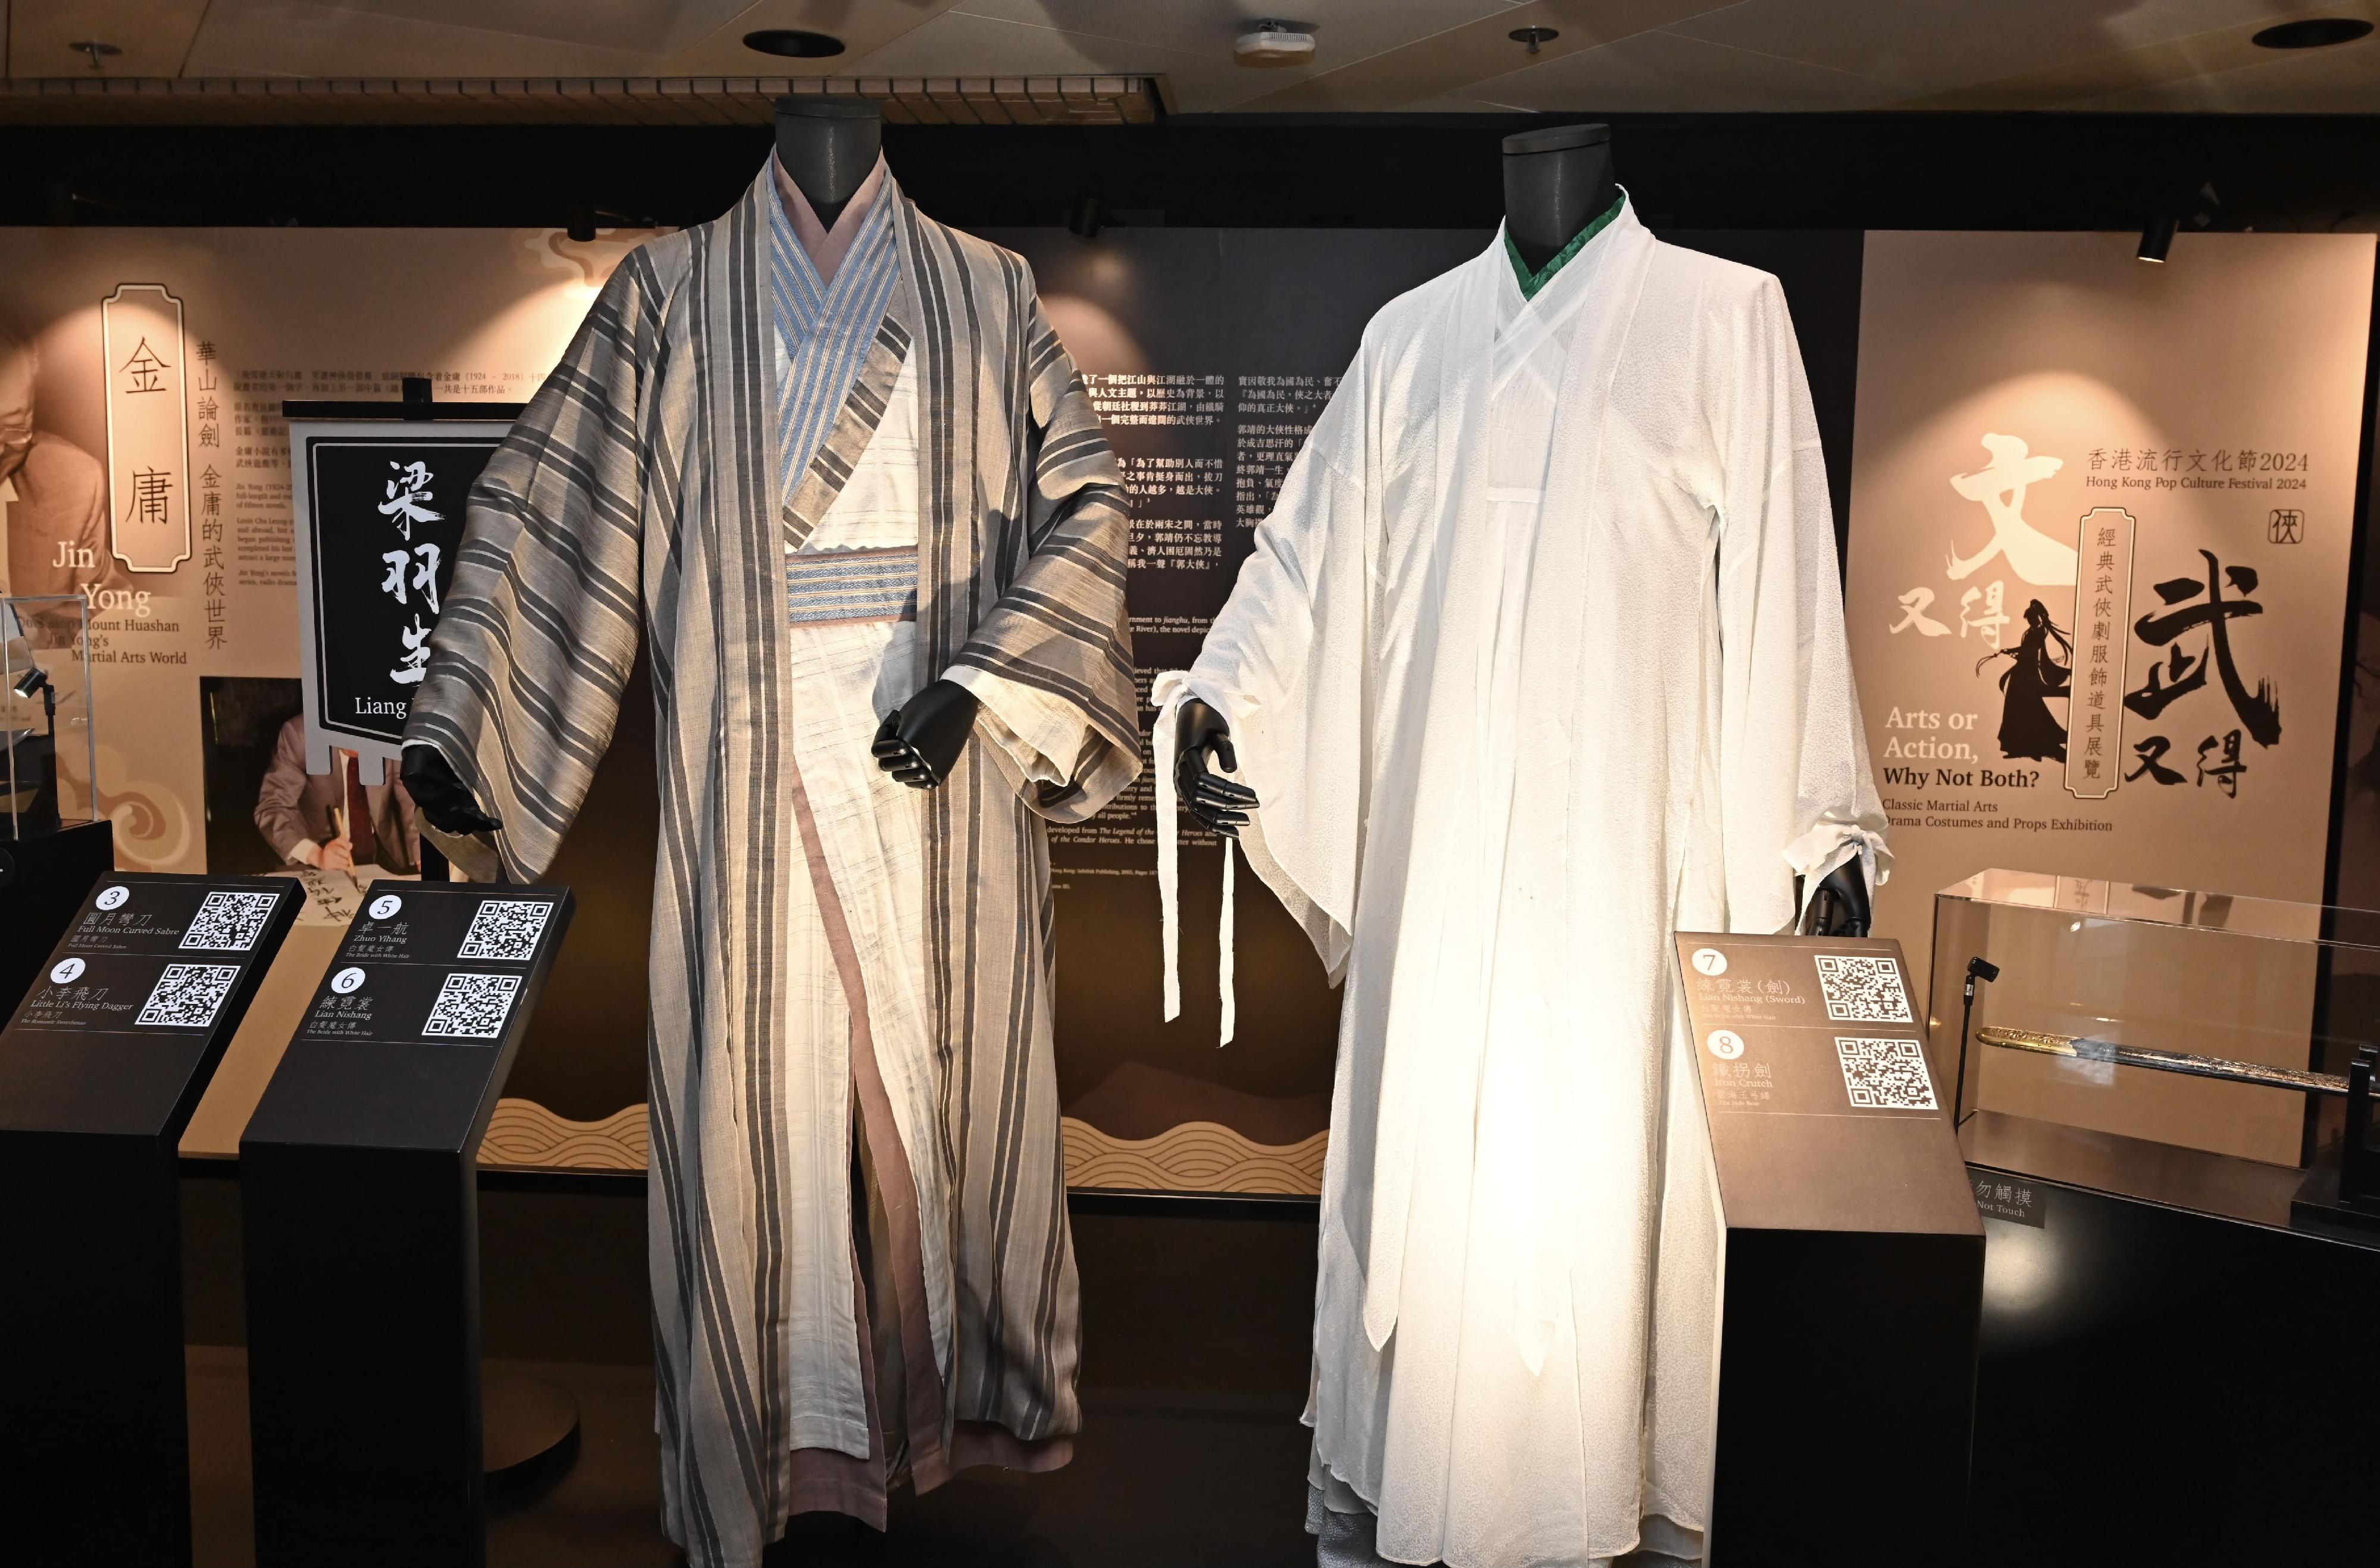 To tie in with its theme "Arts and Action", the second Hong Kong Pop Culture Festival is running a vast range of programmes inspired by martial arts novels. Among them is the "Classic Martial Arts Drama Costumes and Props Exhibition" under the "Arts or Action, Why Not Both?" series, which opened today (April 17) at the foyer of the Hong Kong Cultural Centre. Photo shows the costumes of Zhuo Yihang (left) and Lian Nishang (right) in "The Bride with White Hair".